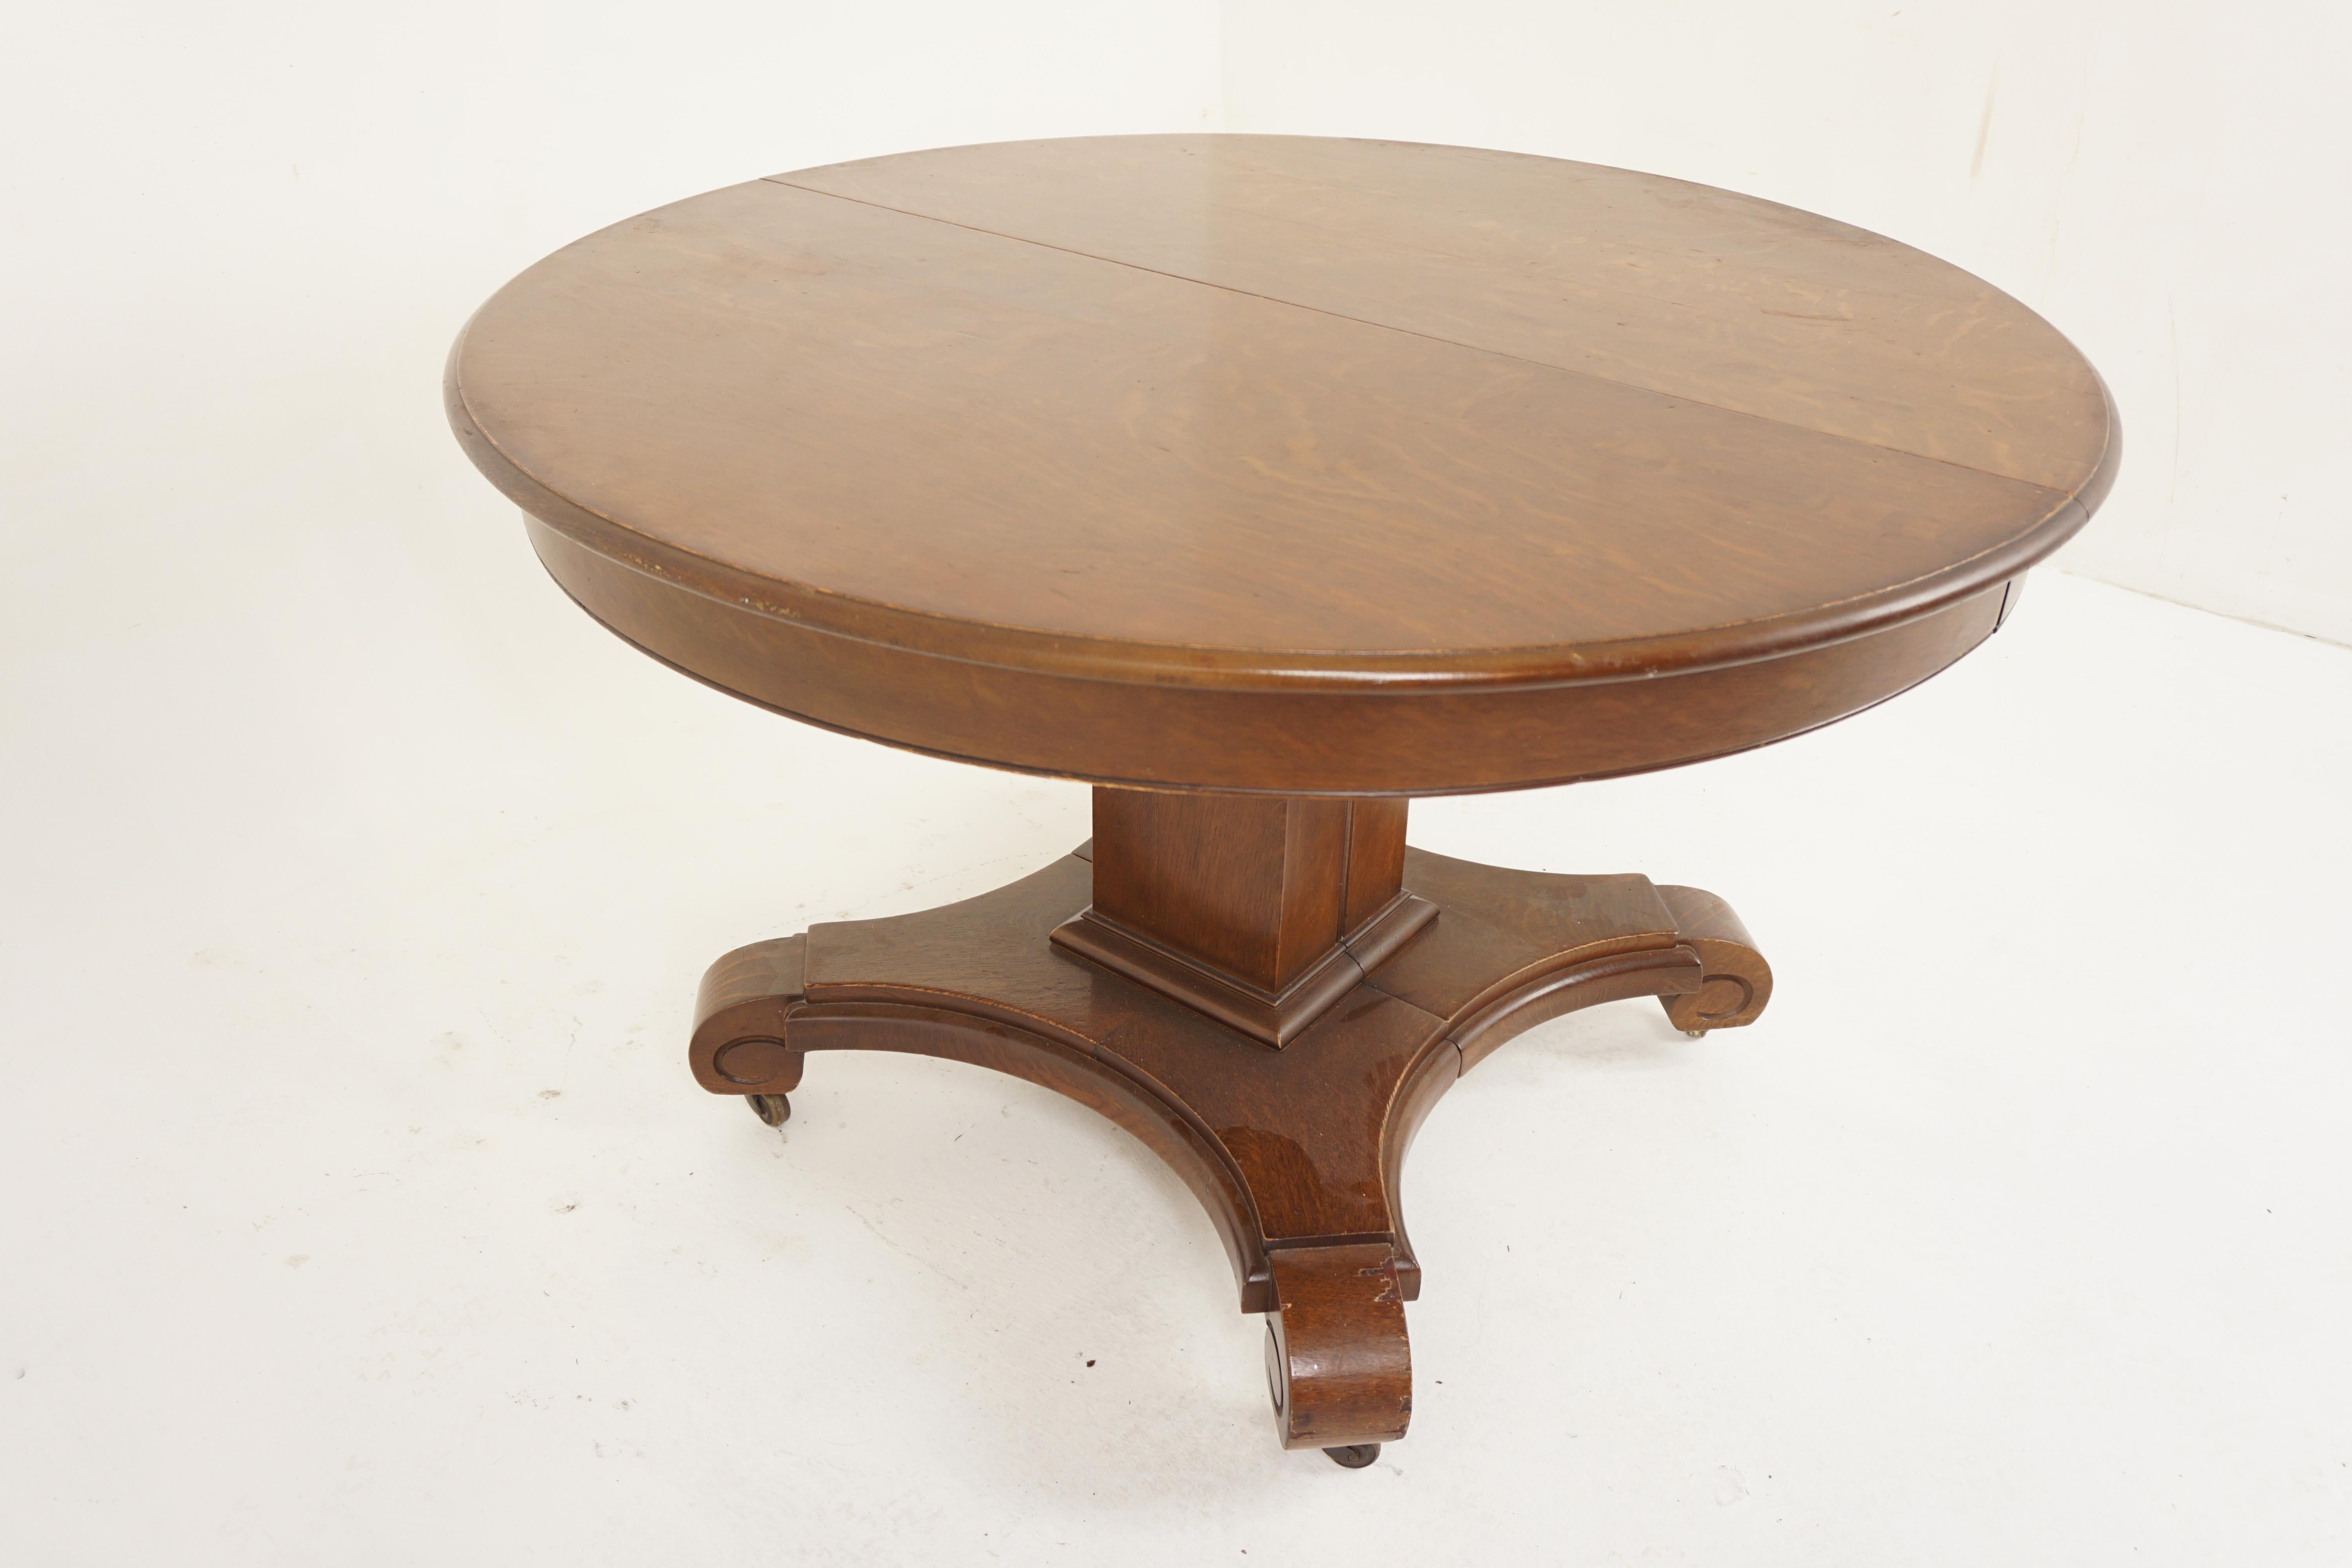 Scottish Mission Tiger Oak Arts & Crafts Round Dining Table 3 Leaves, America 1920, H1197 For Sale